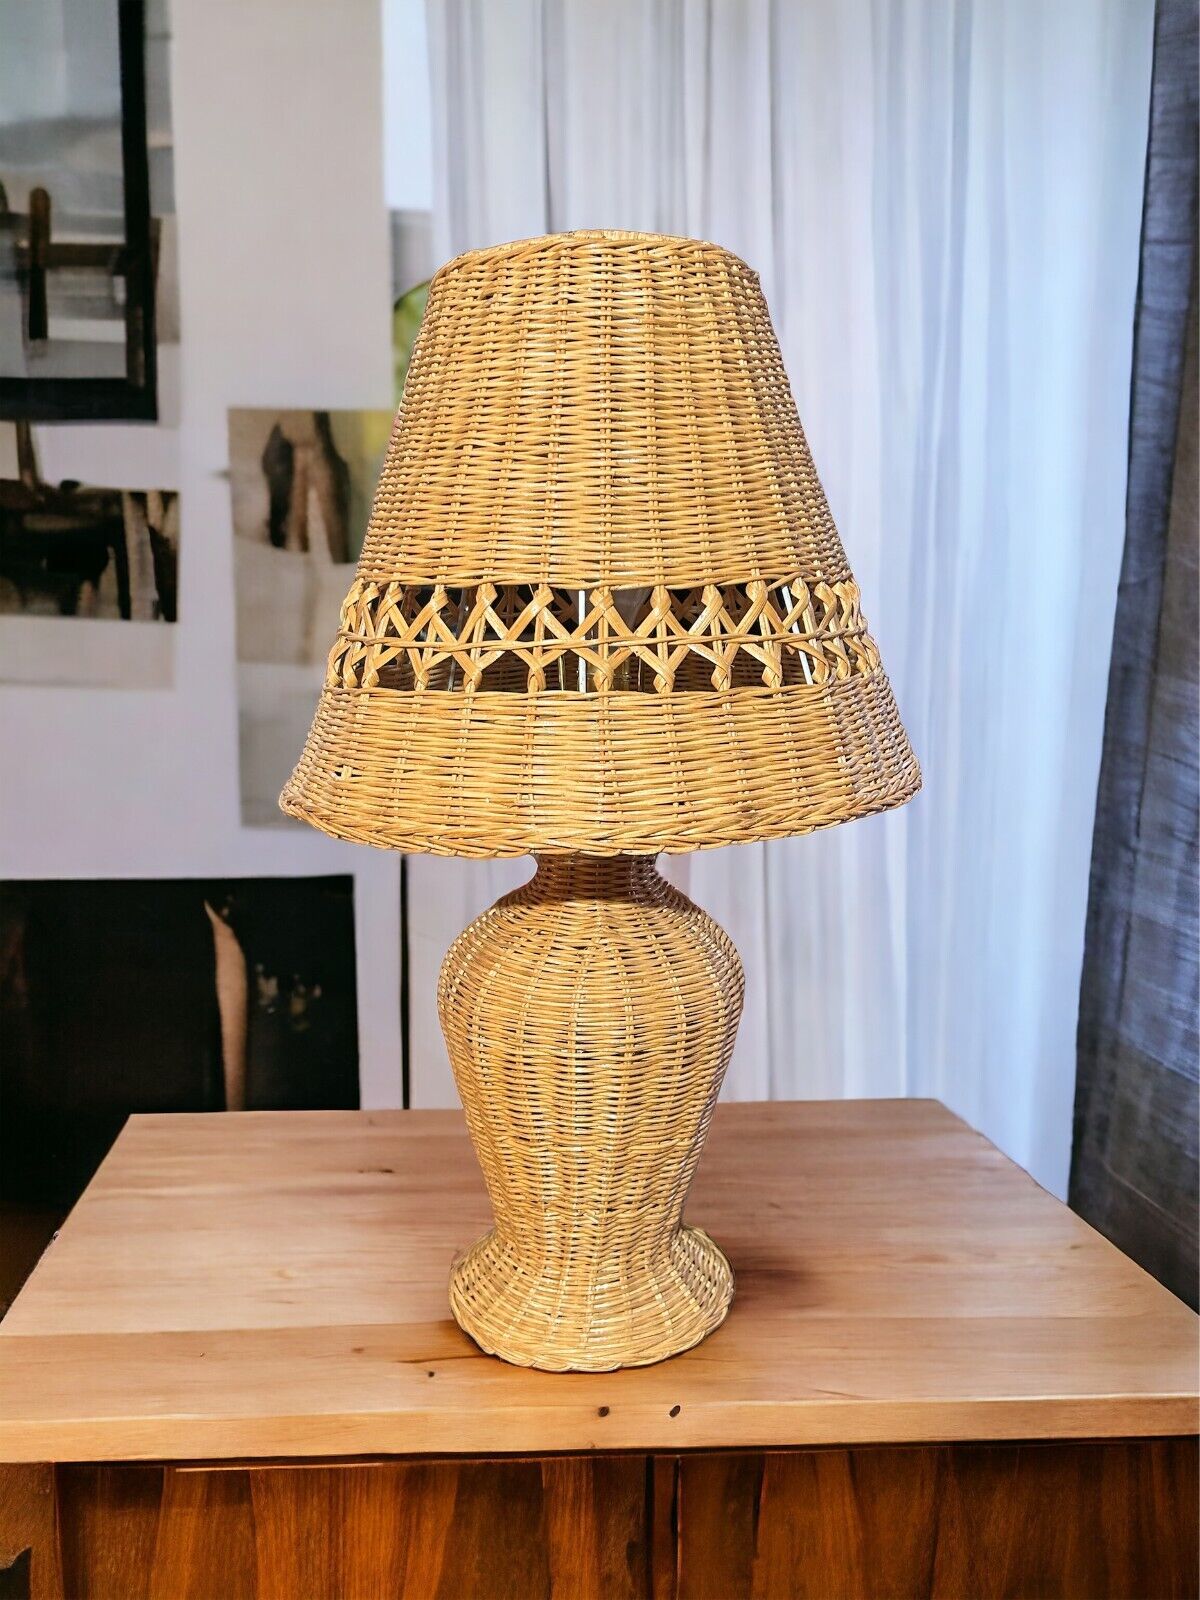 VTG Wicker Rattan Natural/Light Wood Large Table Lamp With Shade 24